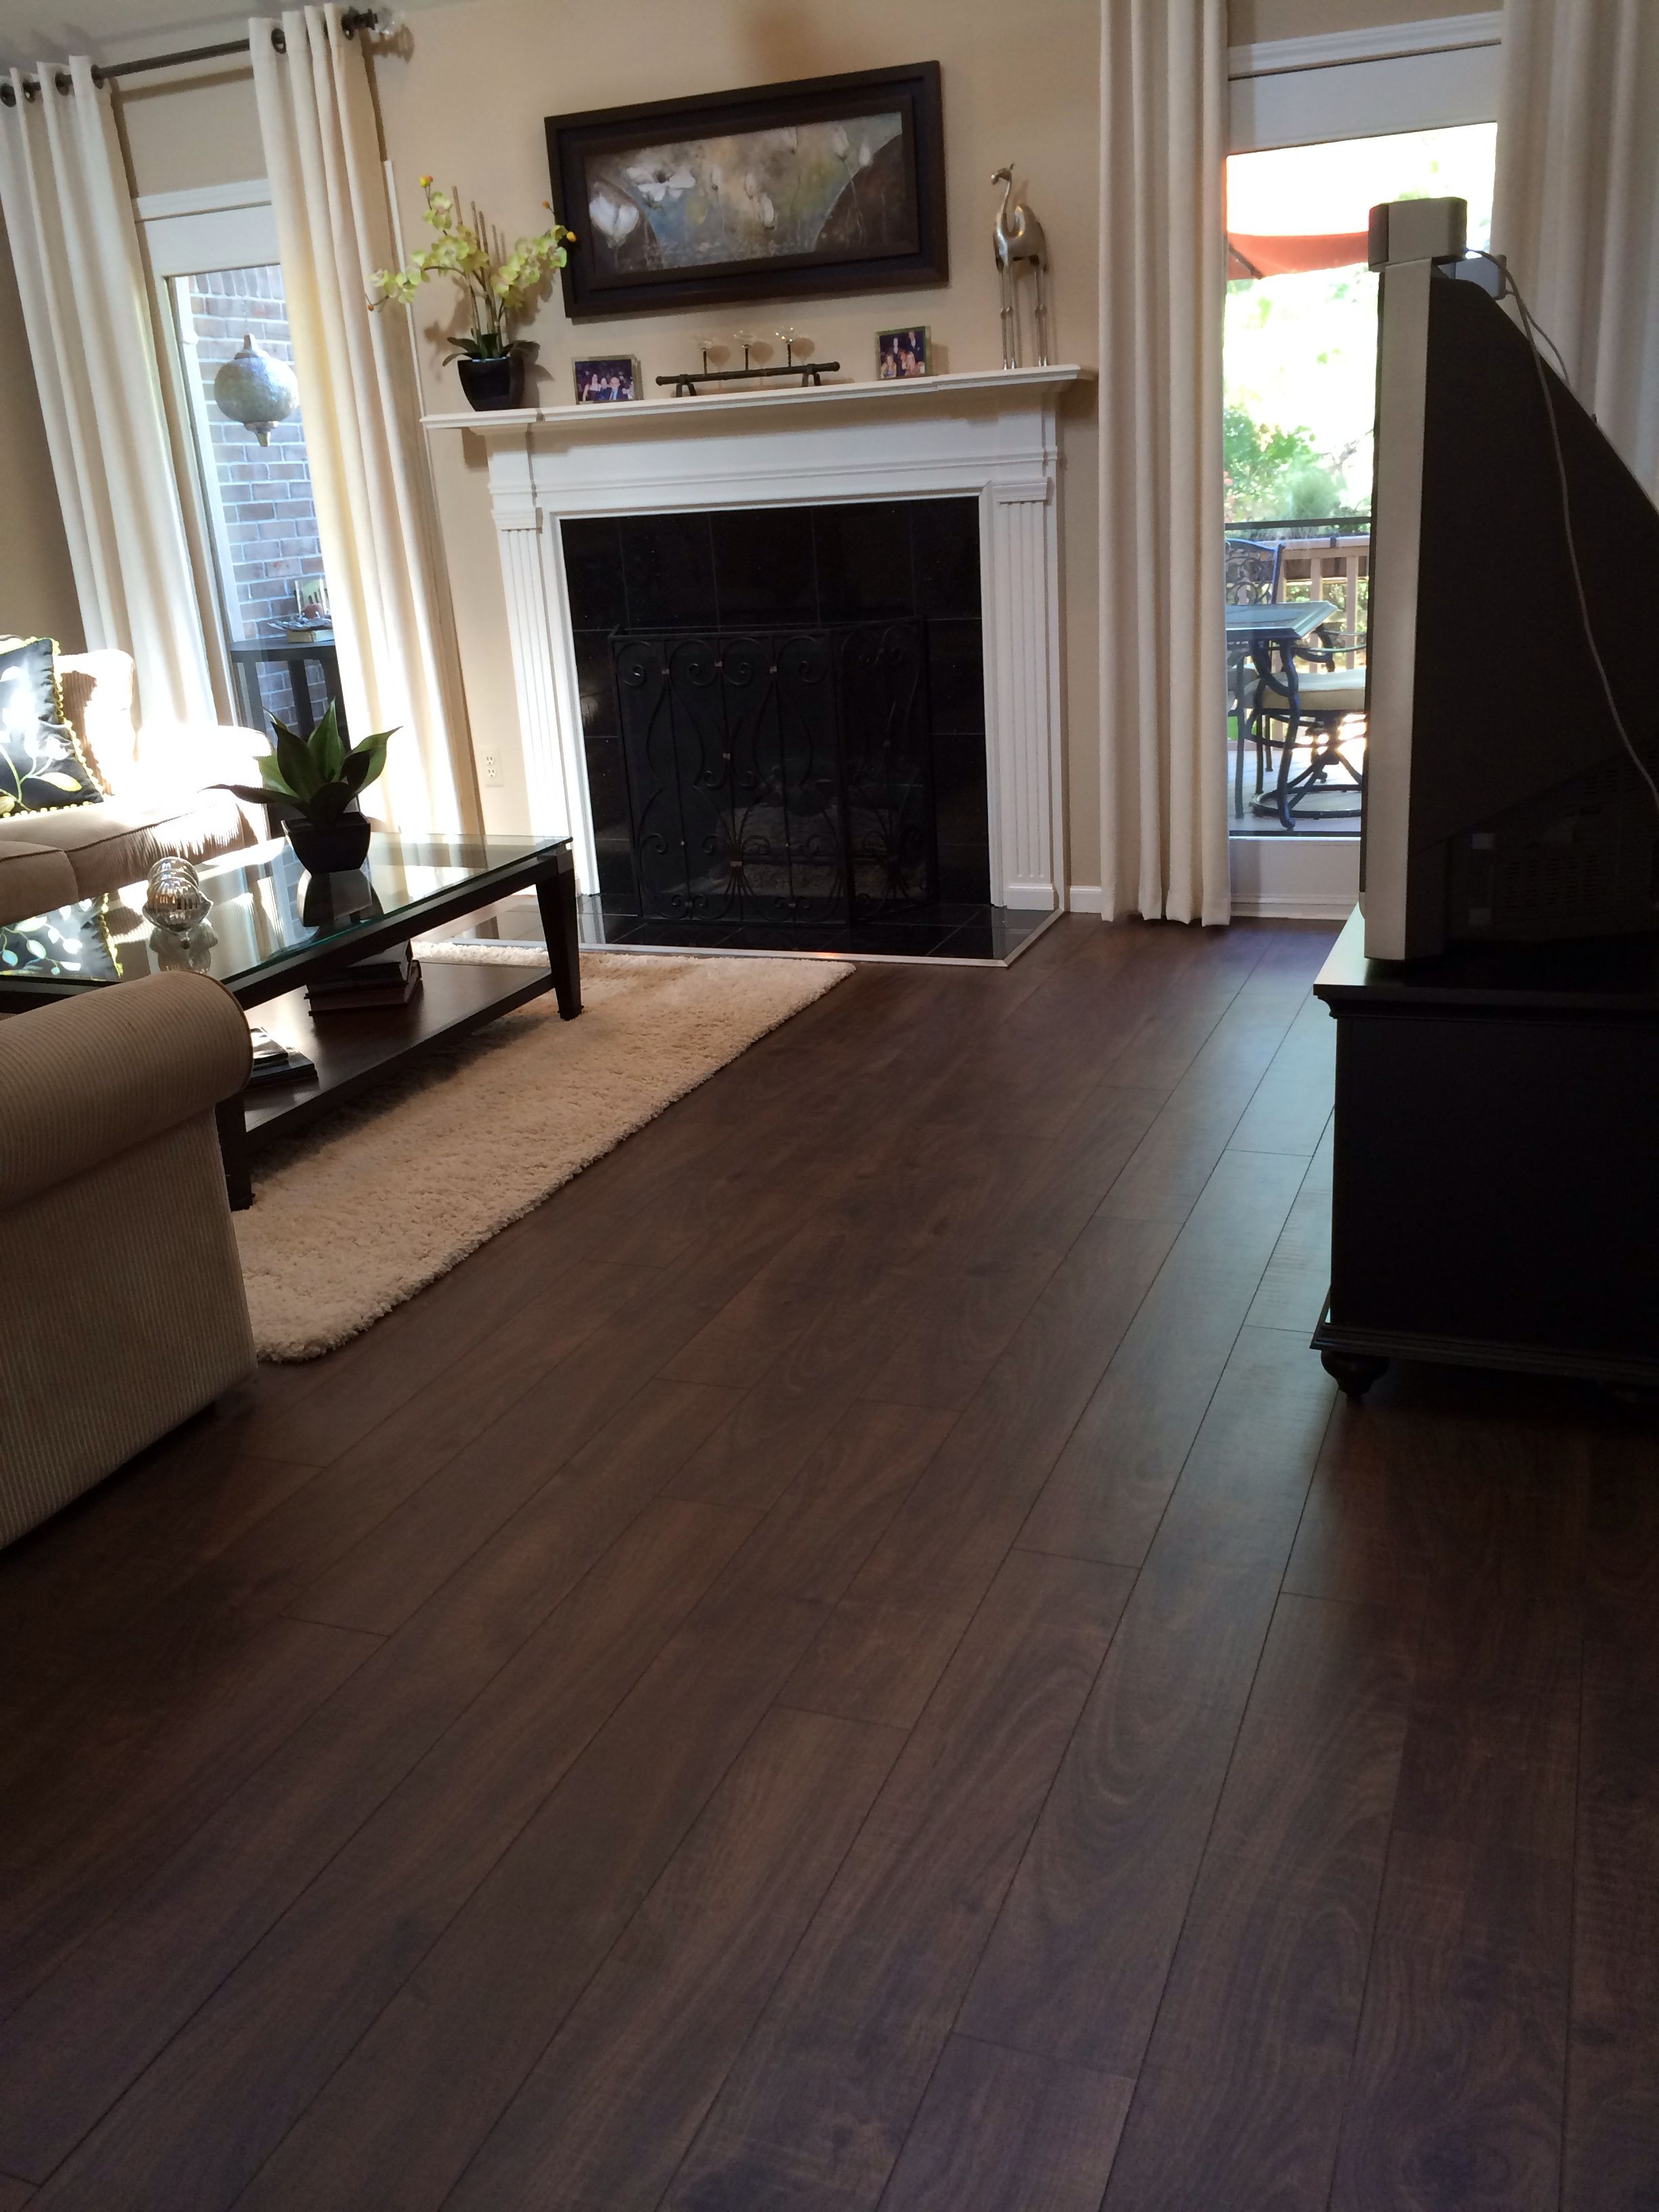 images of dark hardwood floors of pin by liliana legarreta on floors and stairs pinterest home intended for dark laminate kitchen flooring best of dark laminate kitchen flooring we are inspired by laminate floor ideas for more inspiration visit